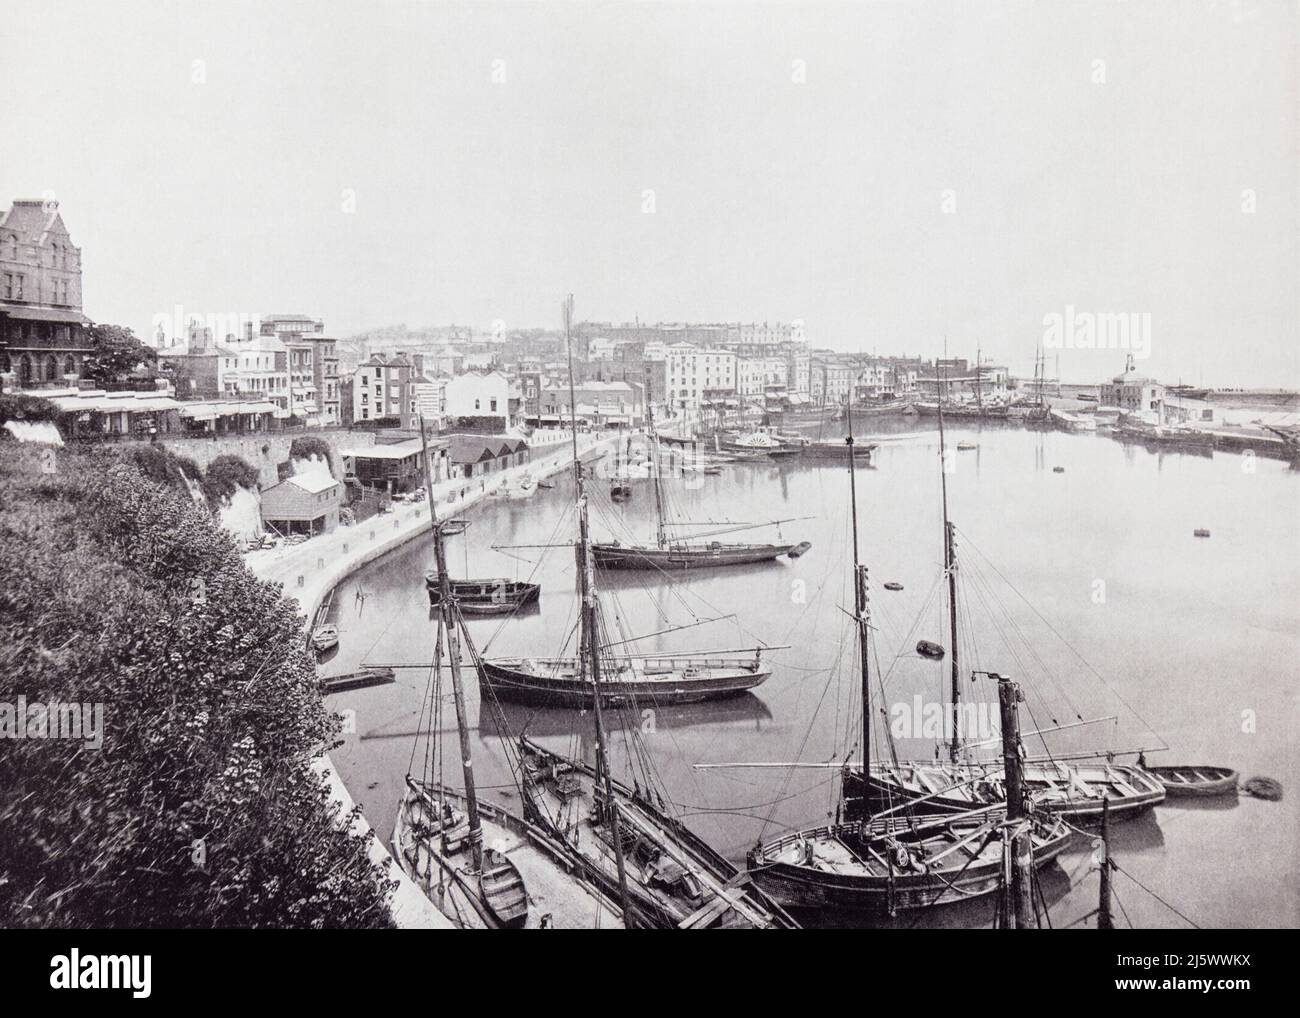 The harbour at Ramsgate, Thanet, Kent, England, seen here in the 19th century.  From Around The Coast,  An Album of Pictures from Photographs of the Chief Seaside Places of Interest in Great Britain and Ireland published London, 1895, by George Newnes Limited. Stock Photo